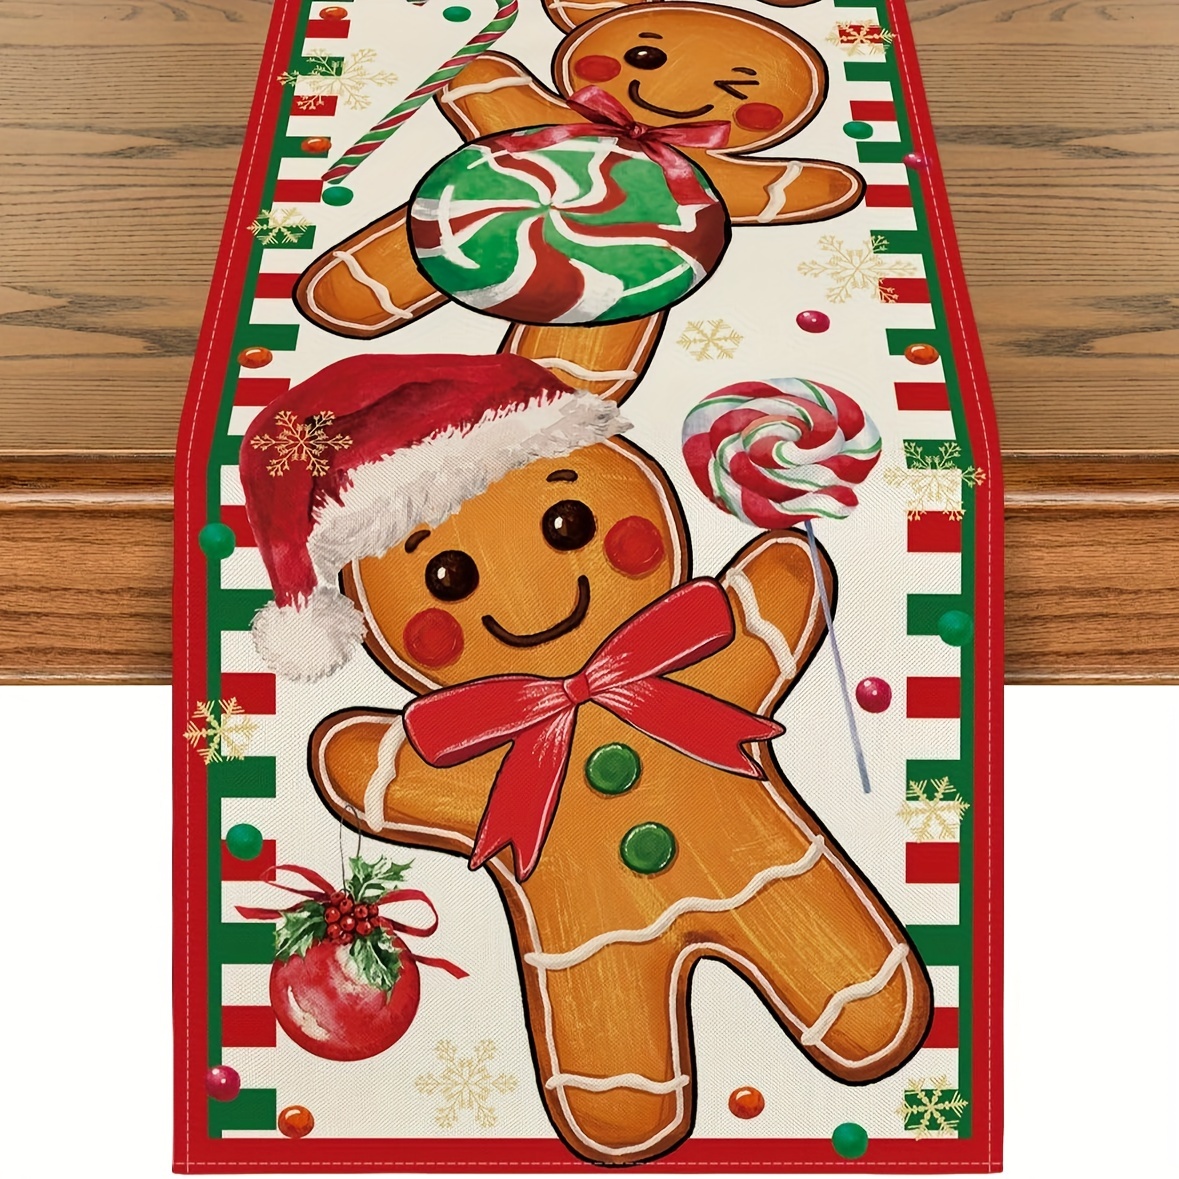 

Festive Gingerbread & Candy Cane Christmas Table Runner - Polyester, Rectangular, Woven Design For Holiday Dining Decor, 13x90 Inch